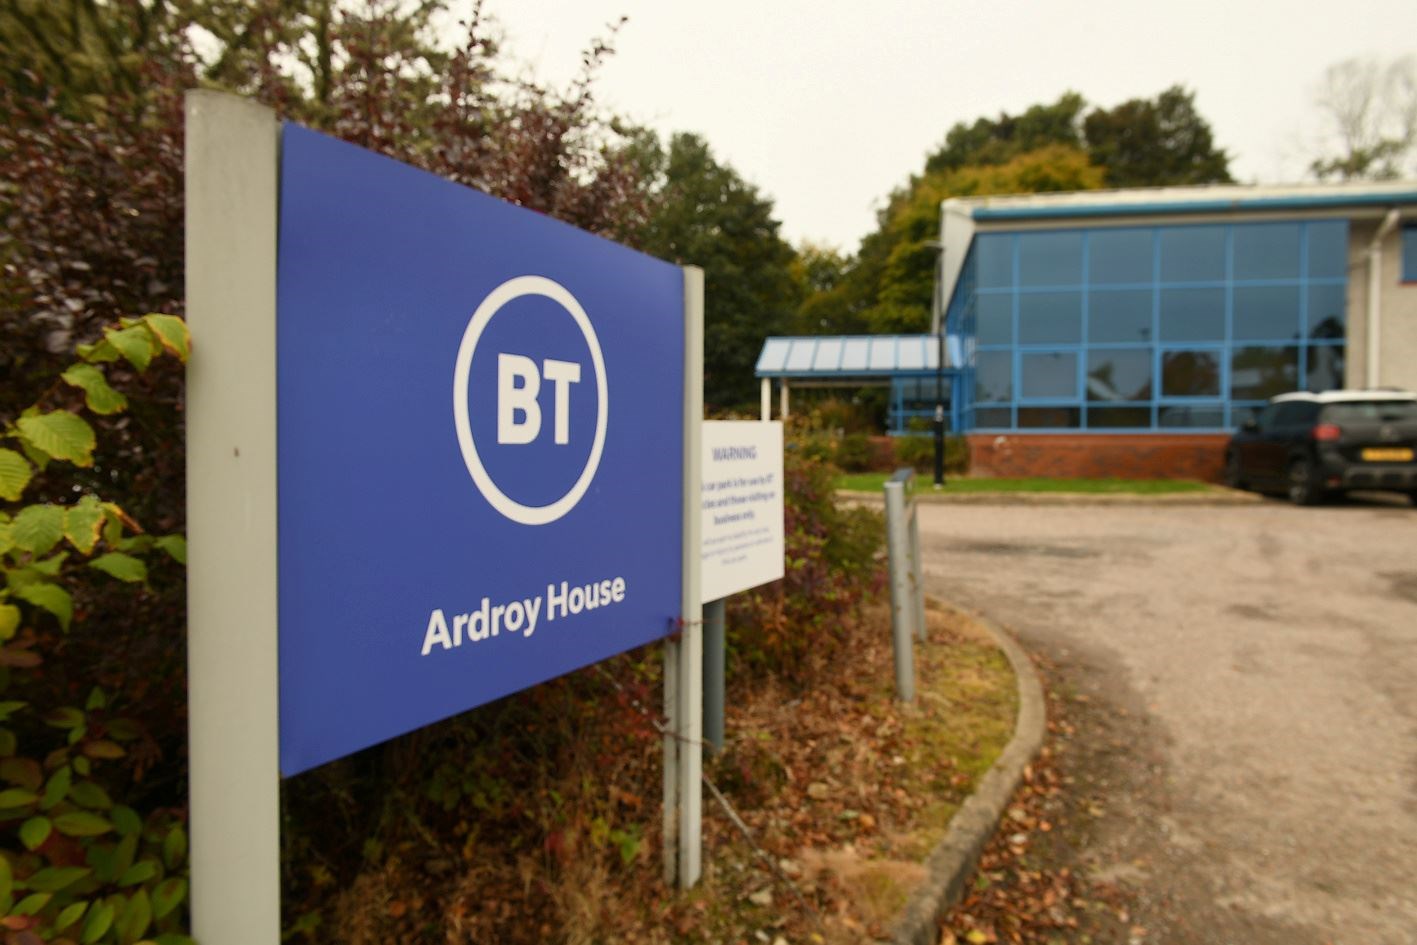 BT's Ardroy House is at the centre of controversial closure proposals. Picture: James Mackenzie.